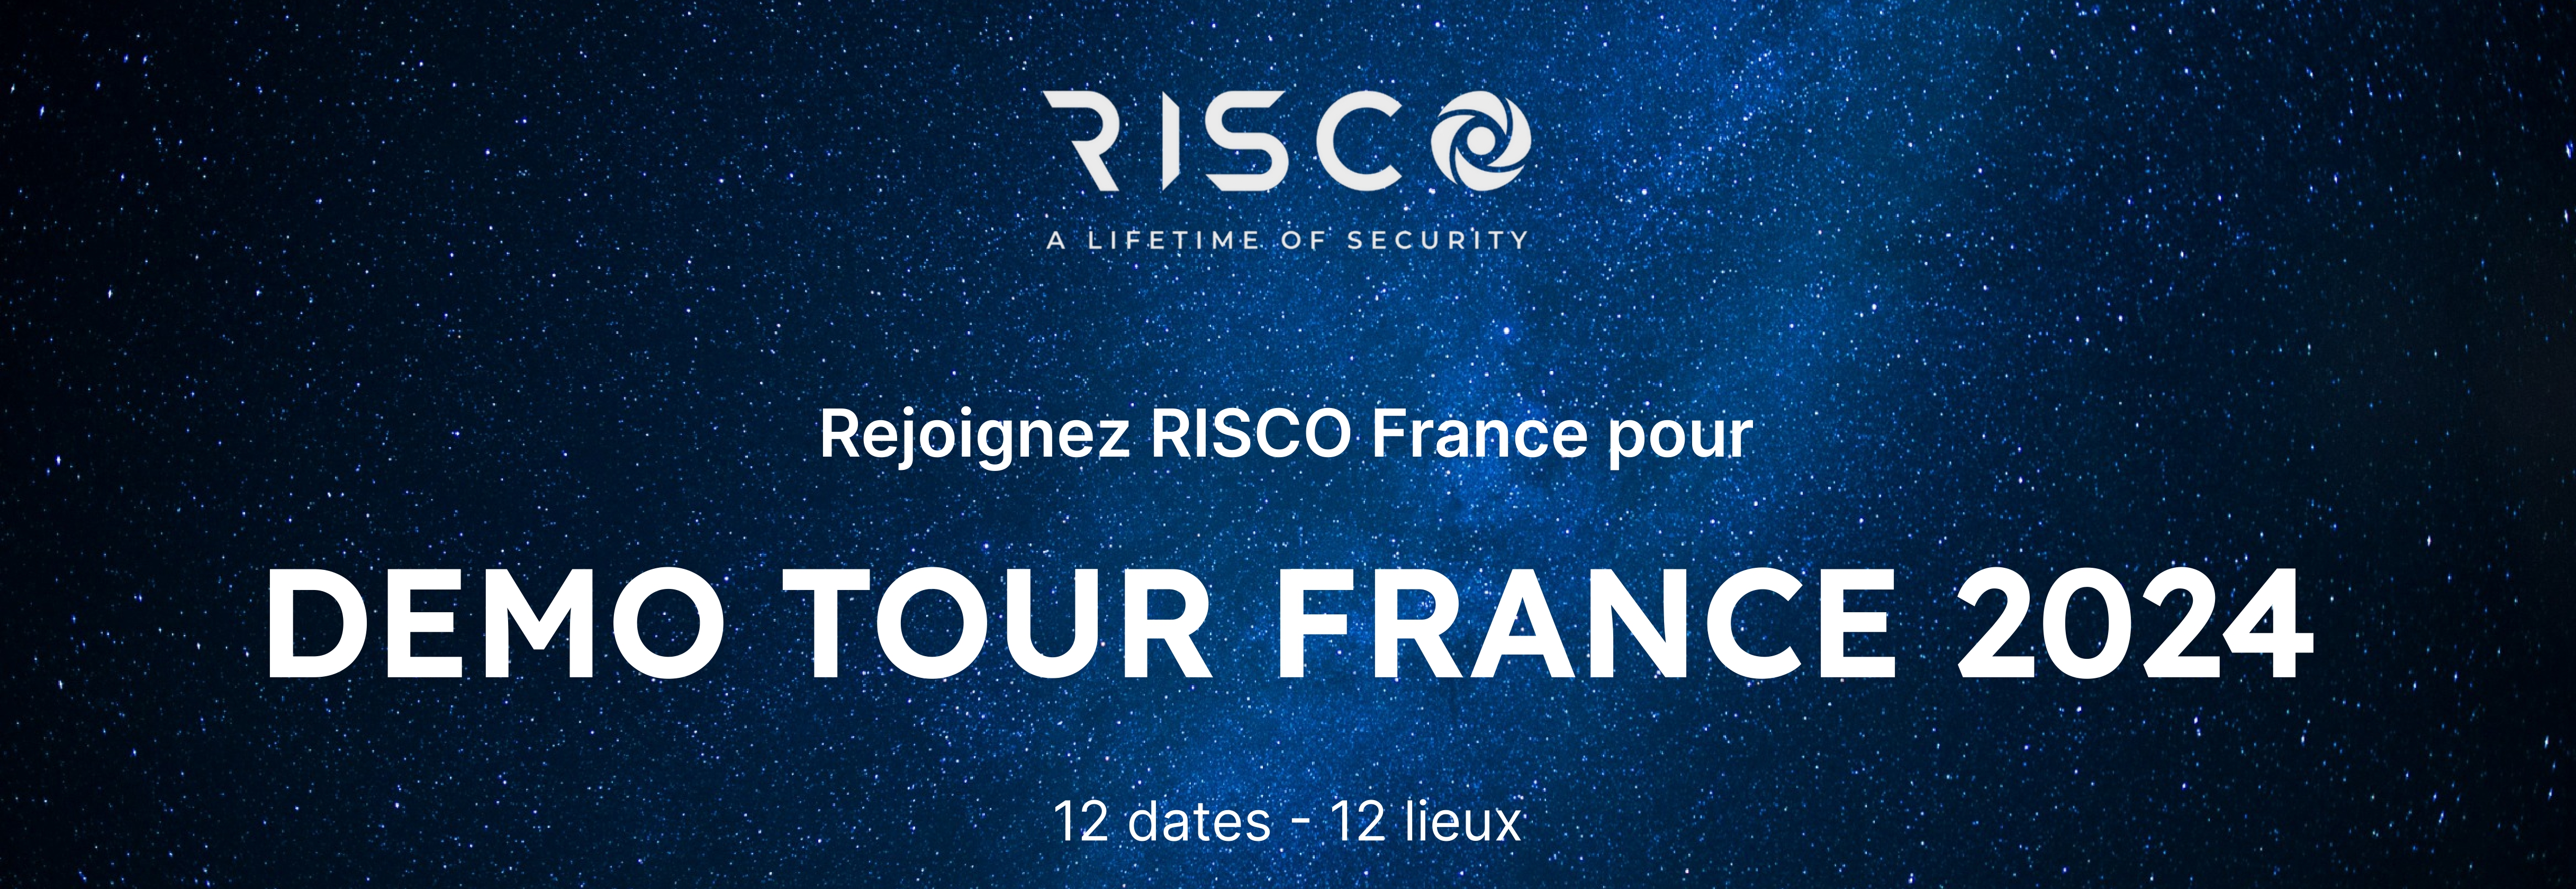 Formation RISCO Demo Tour France 2024